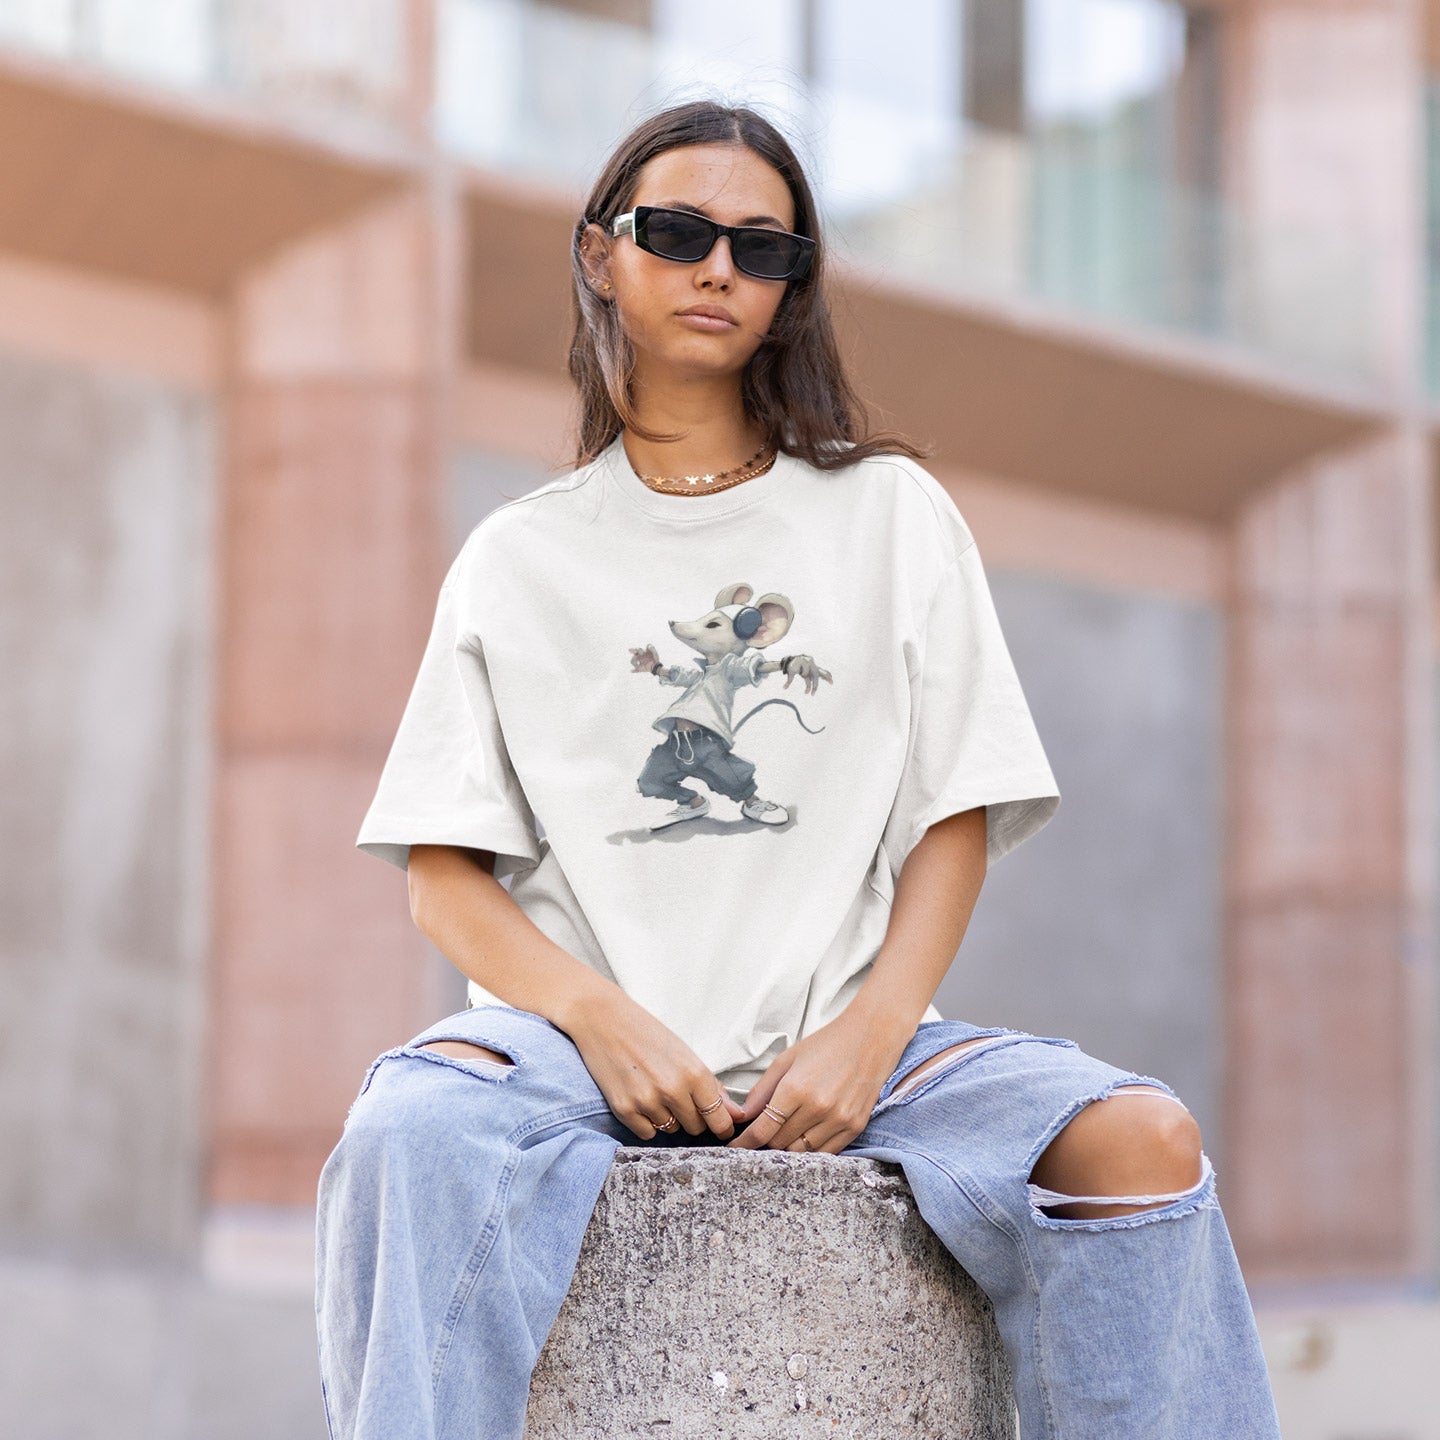 Girl sitting post wearing a white t-shirt with a hip hop mouse print